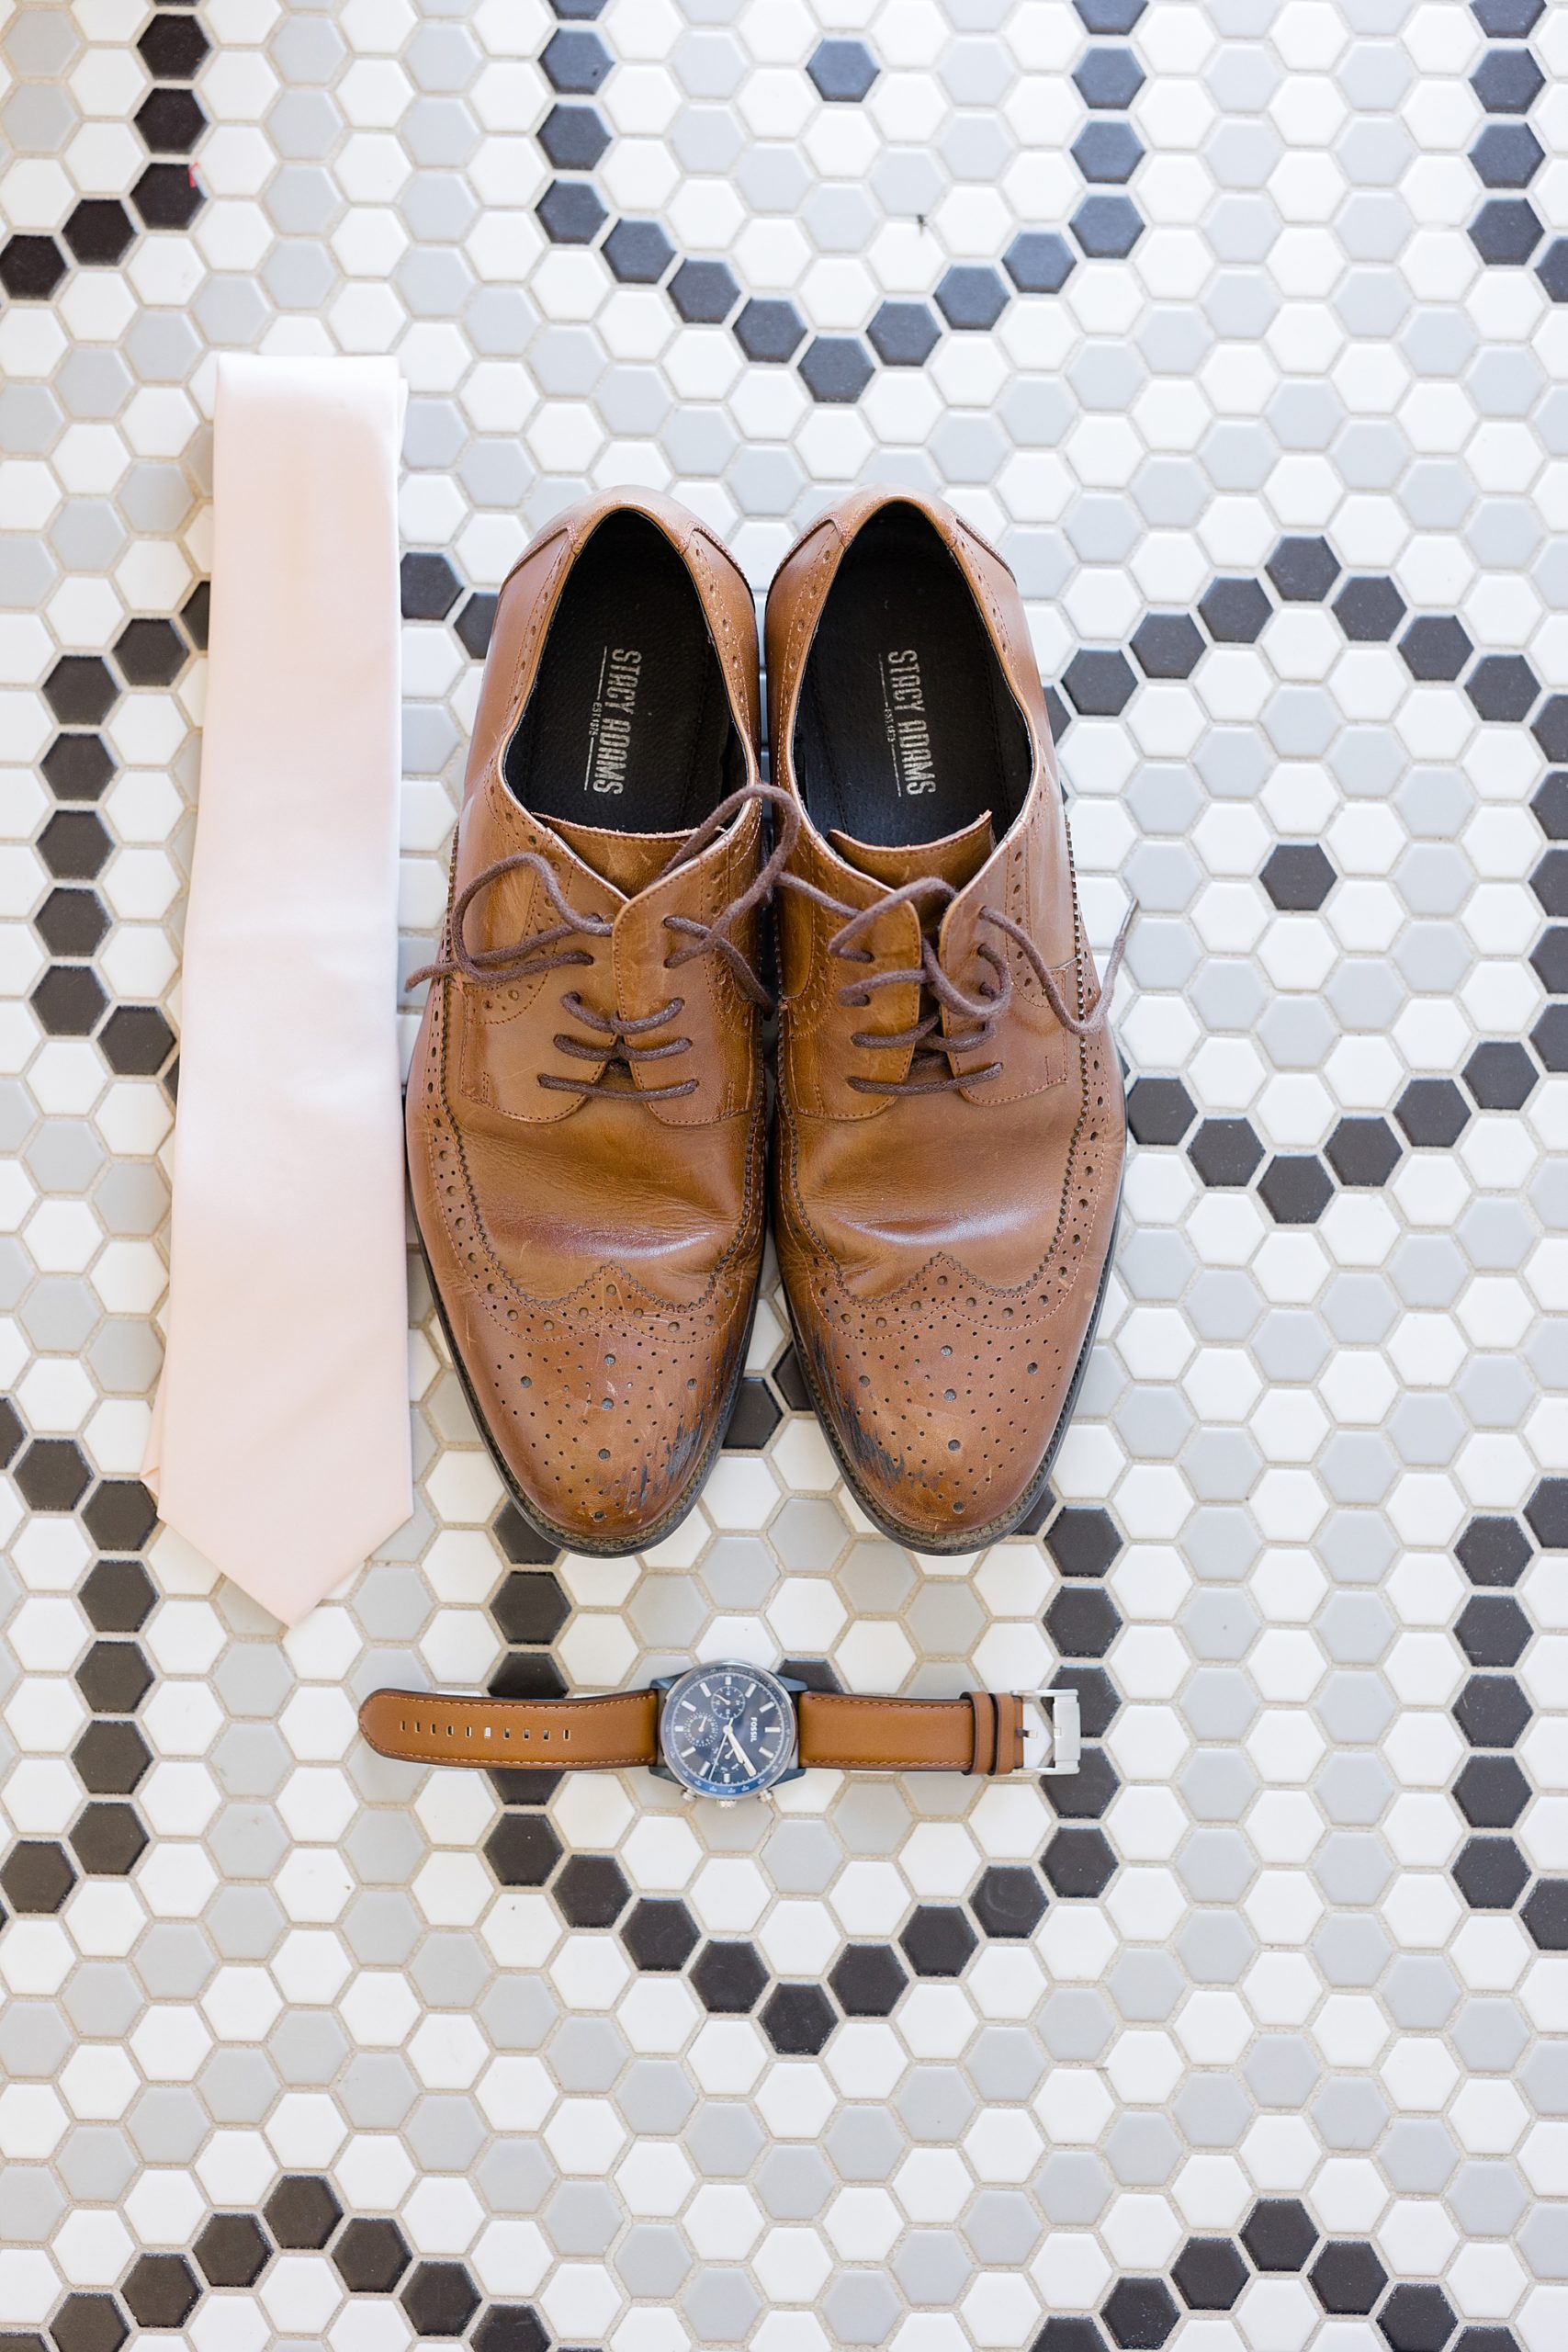 groom's shoes and pink tie for TX wedding